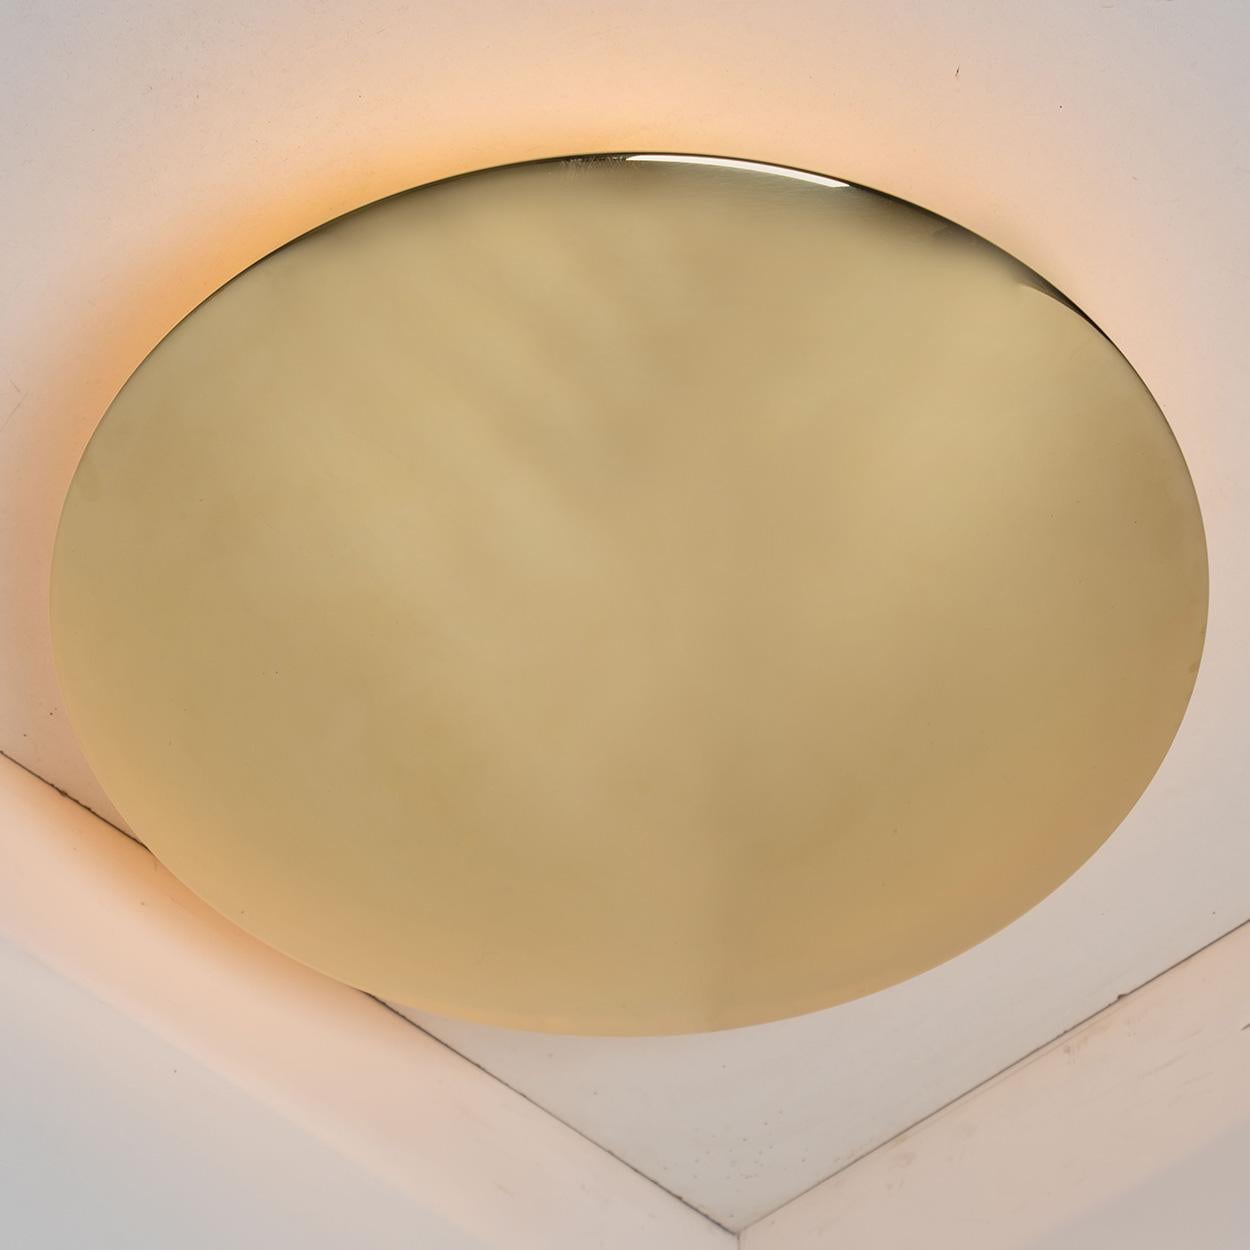 Pair of high quality brass flushmount ceiling lights 'Sela 50' by Florian Schulz. Slid brass in a tarnished finis dish with five bulb setup around that stem, the flushmounts can also be used as a wall lights.

The stylish and clean elegance of this